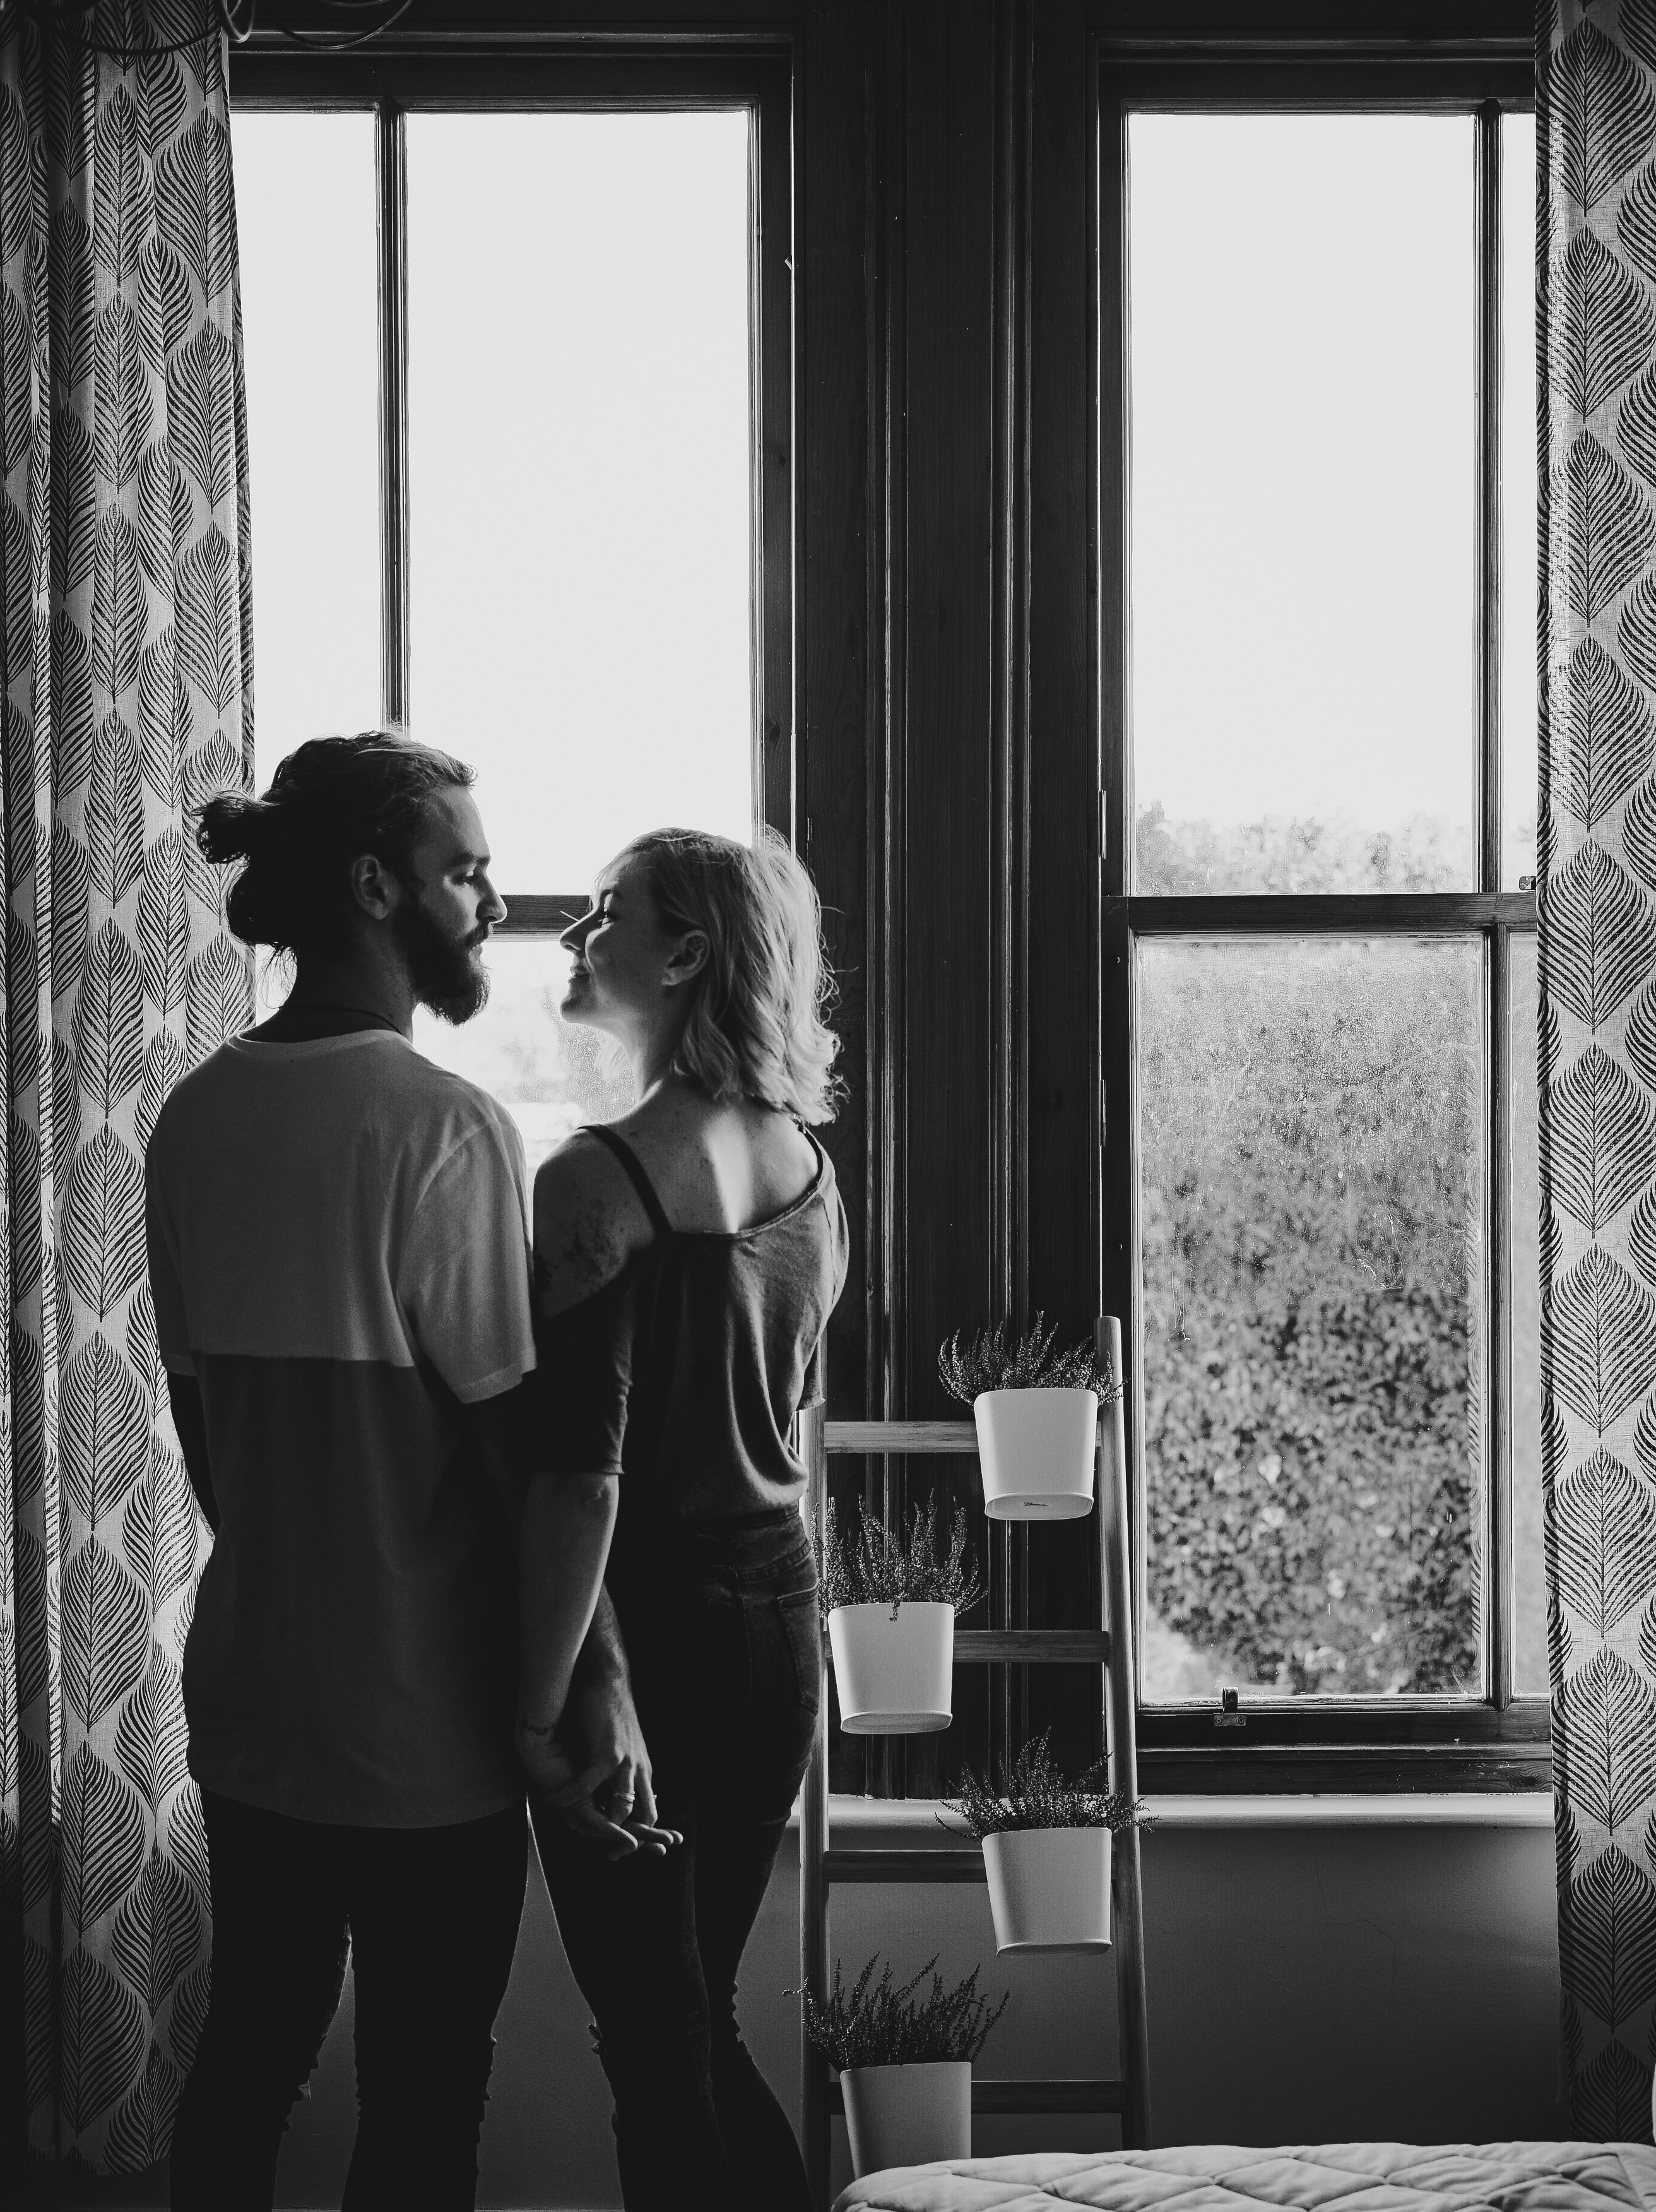 A grayscale image of a couple | Source: Unsplash